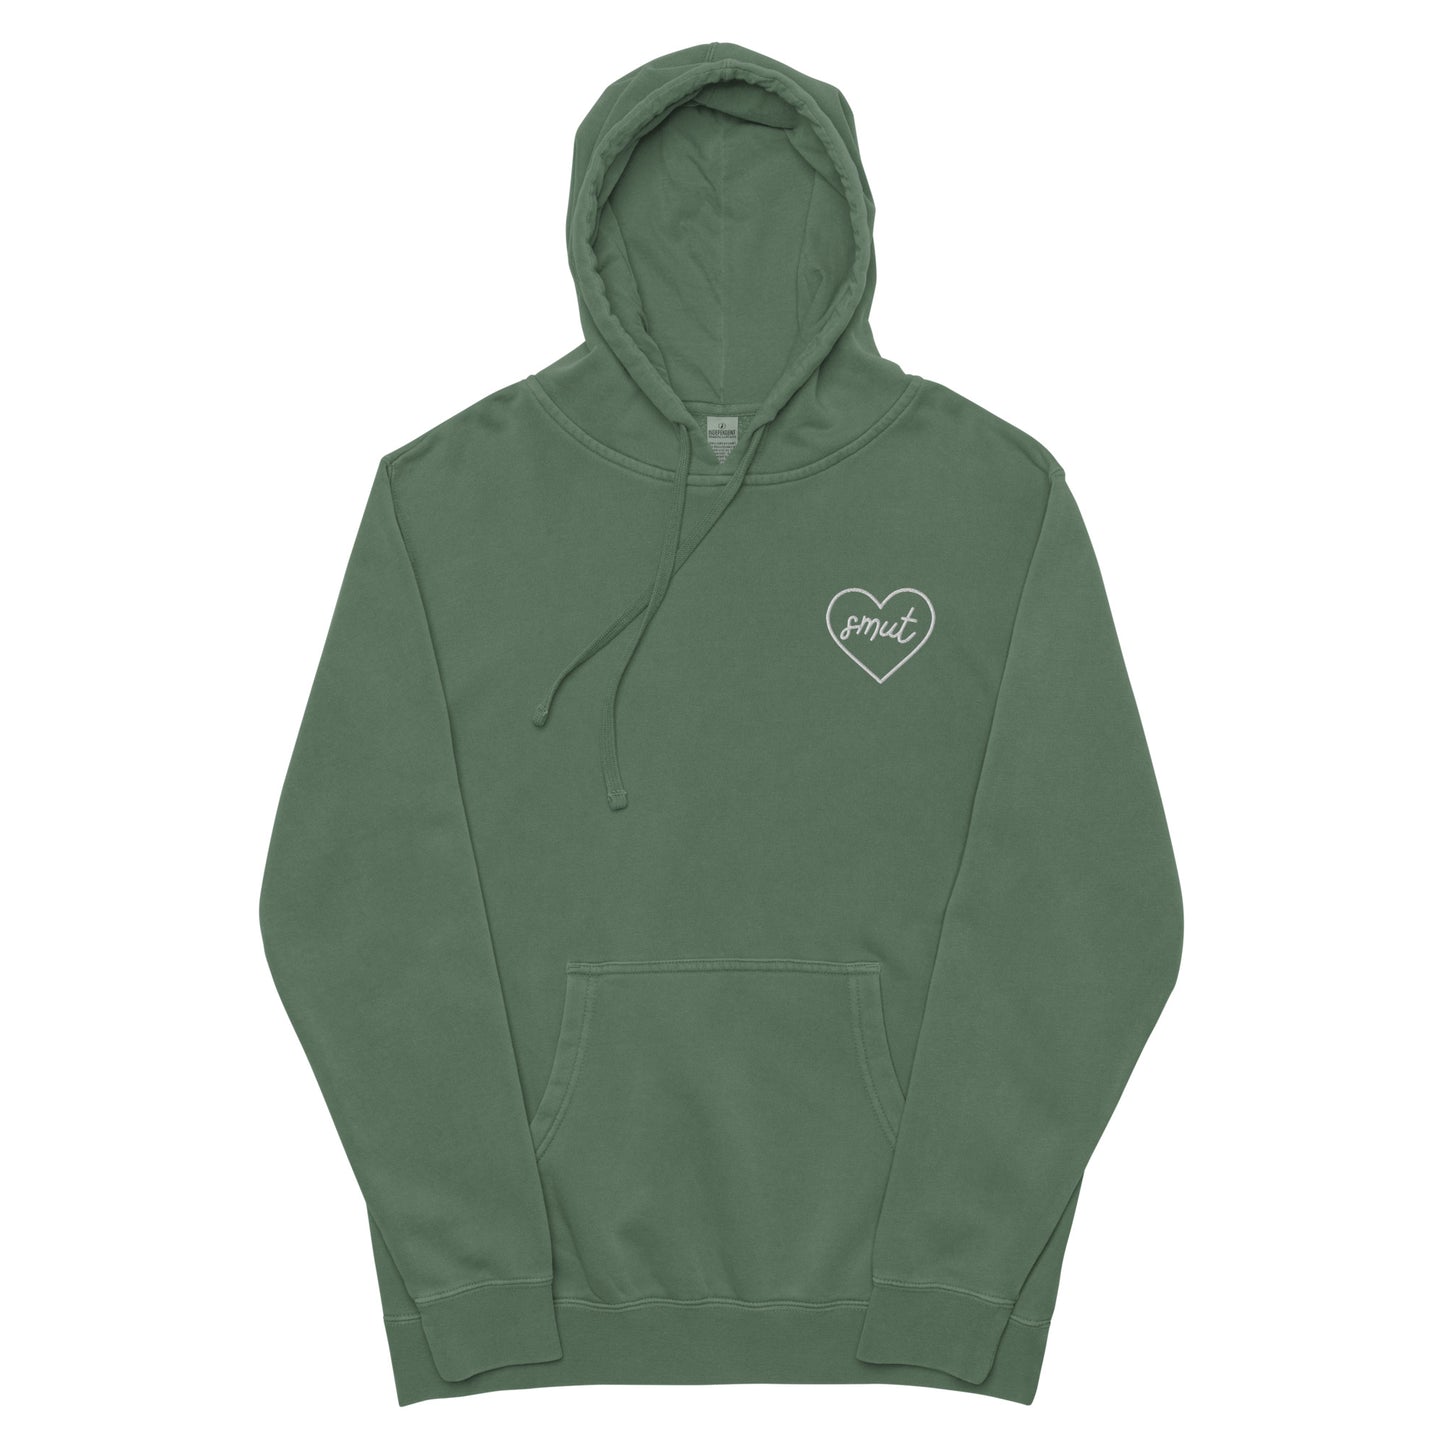 smut heart embroidered hoodie